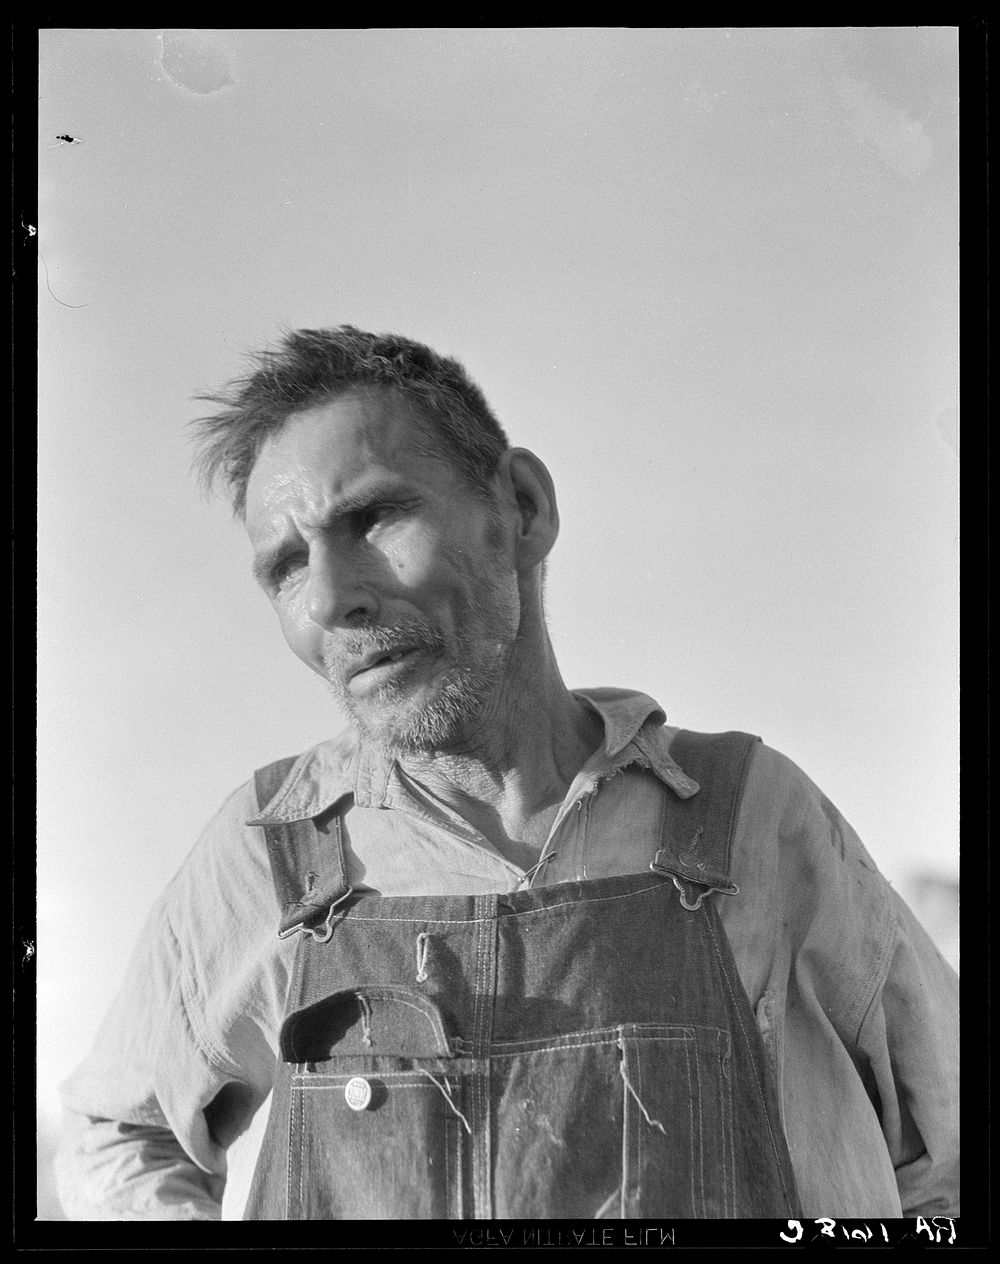 Imperial Valley, California. Old Mexican laborer saying "I have worked all my life and all I have now is my broken body".…